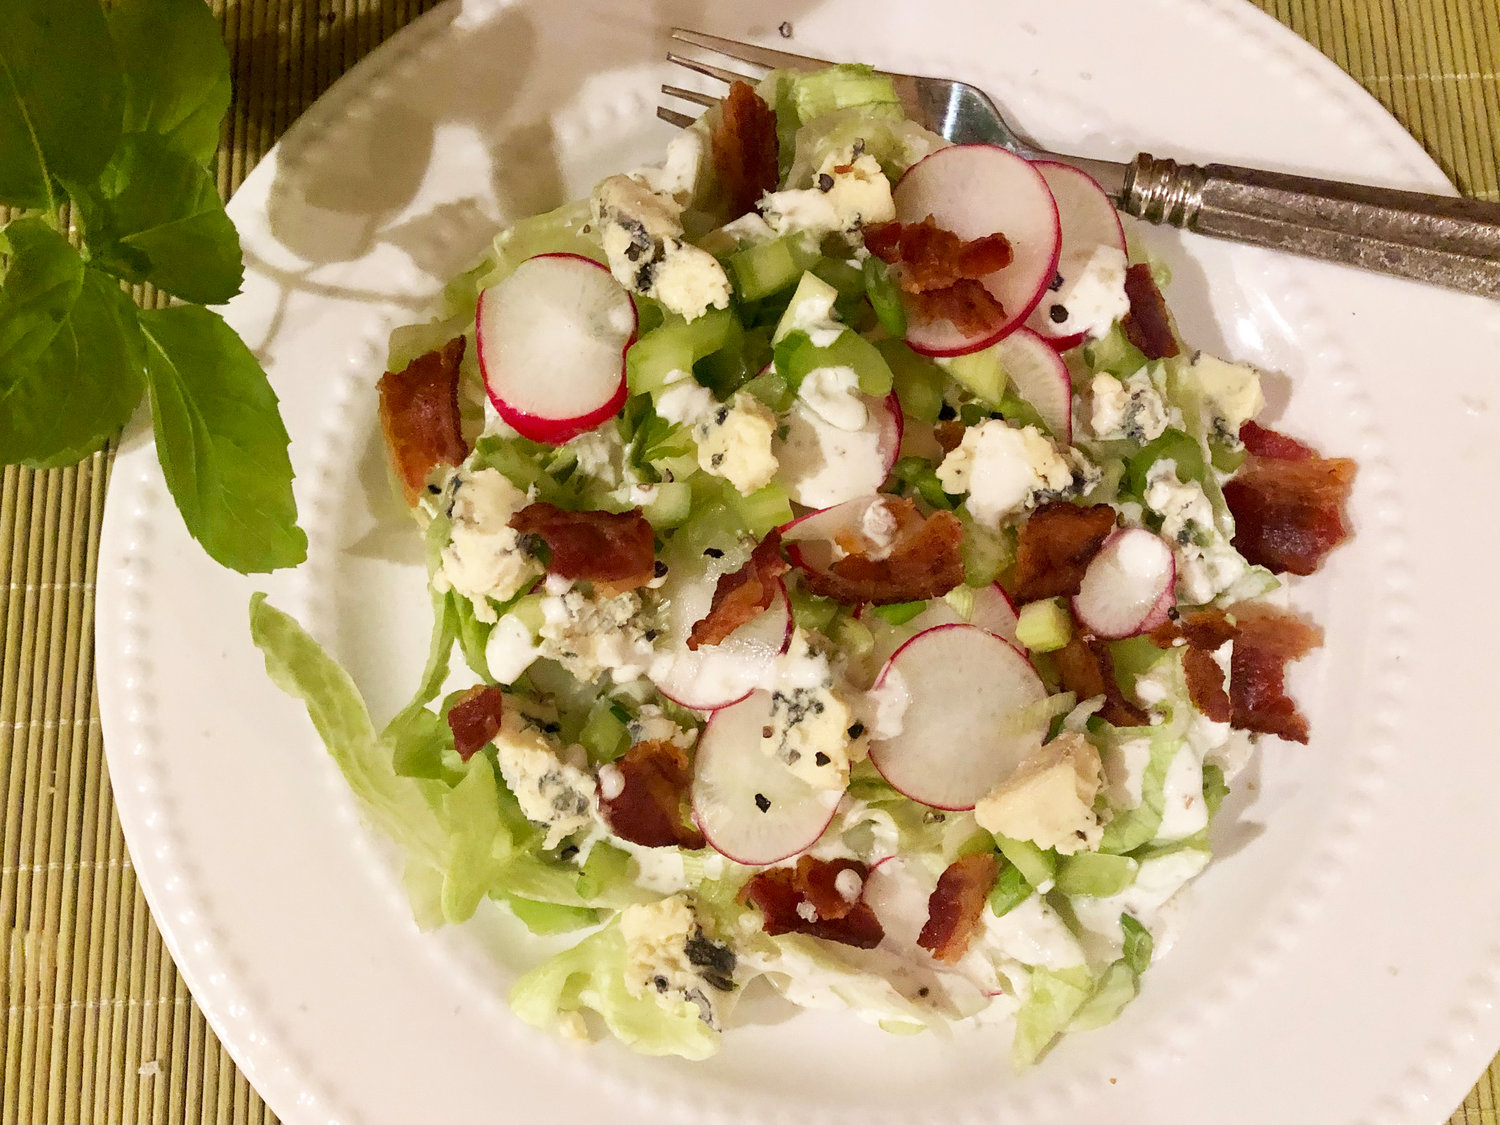 Crispy bacon makes this Crunchy Iceberg and Celery Salad with Creamy Blue Cheese an all-season favorite.